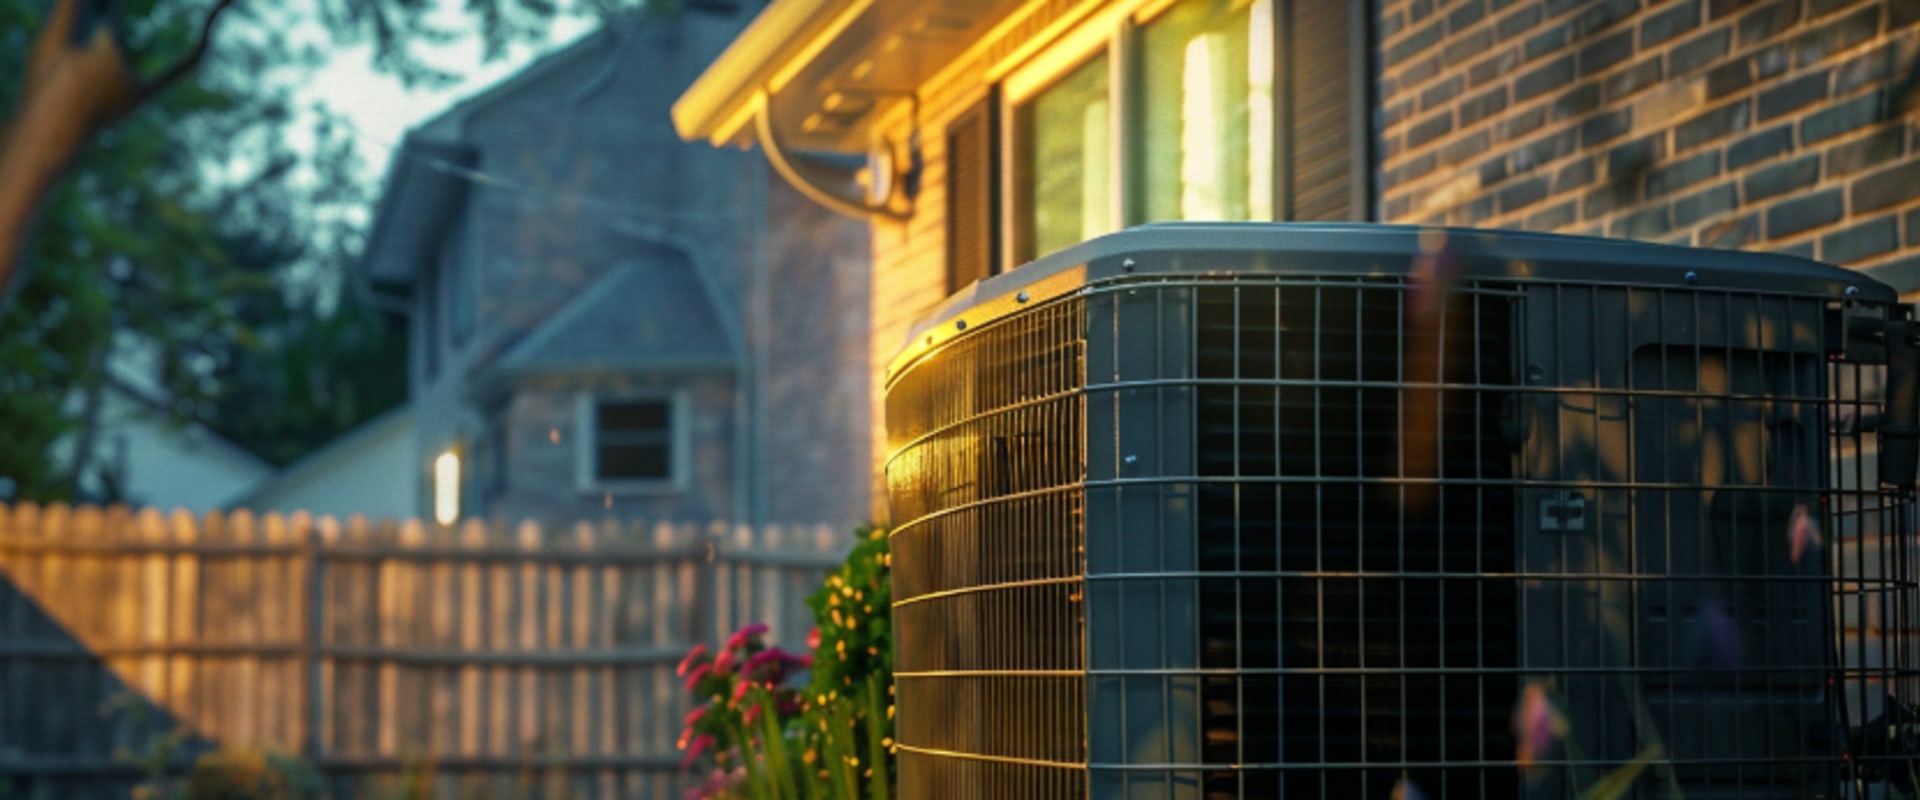 Maximize Comfort With HVAC Replacement Service Near Miami Beach FL And The Benefits Of Duct Sealing